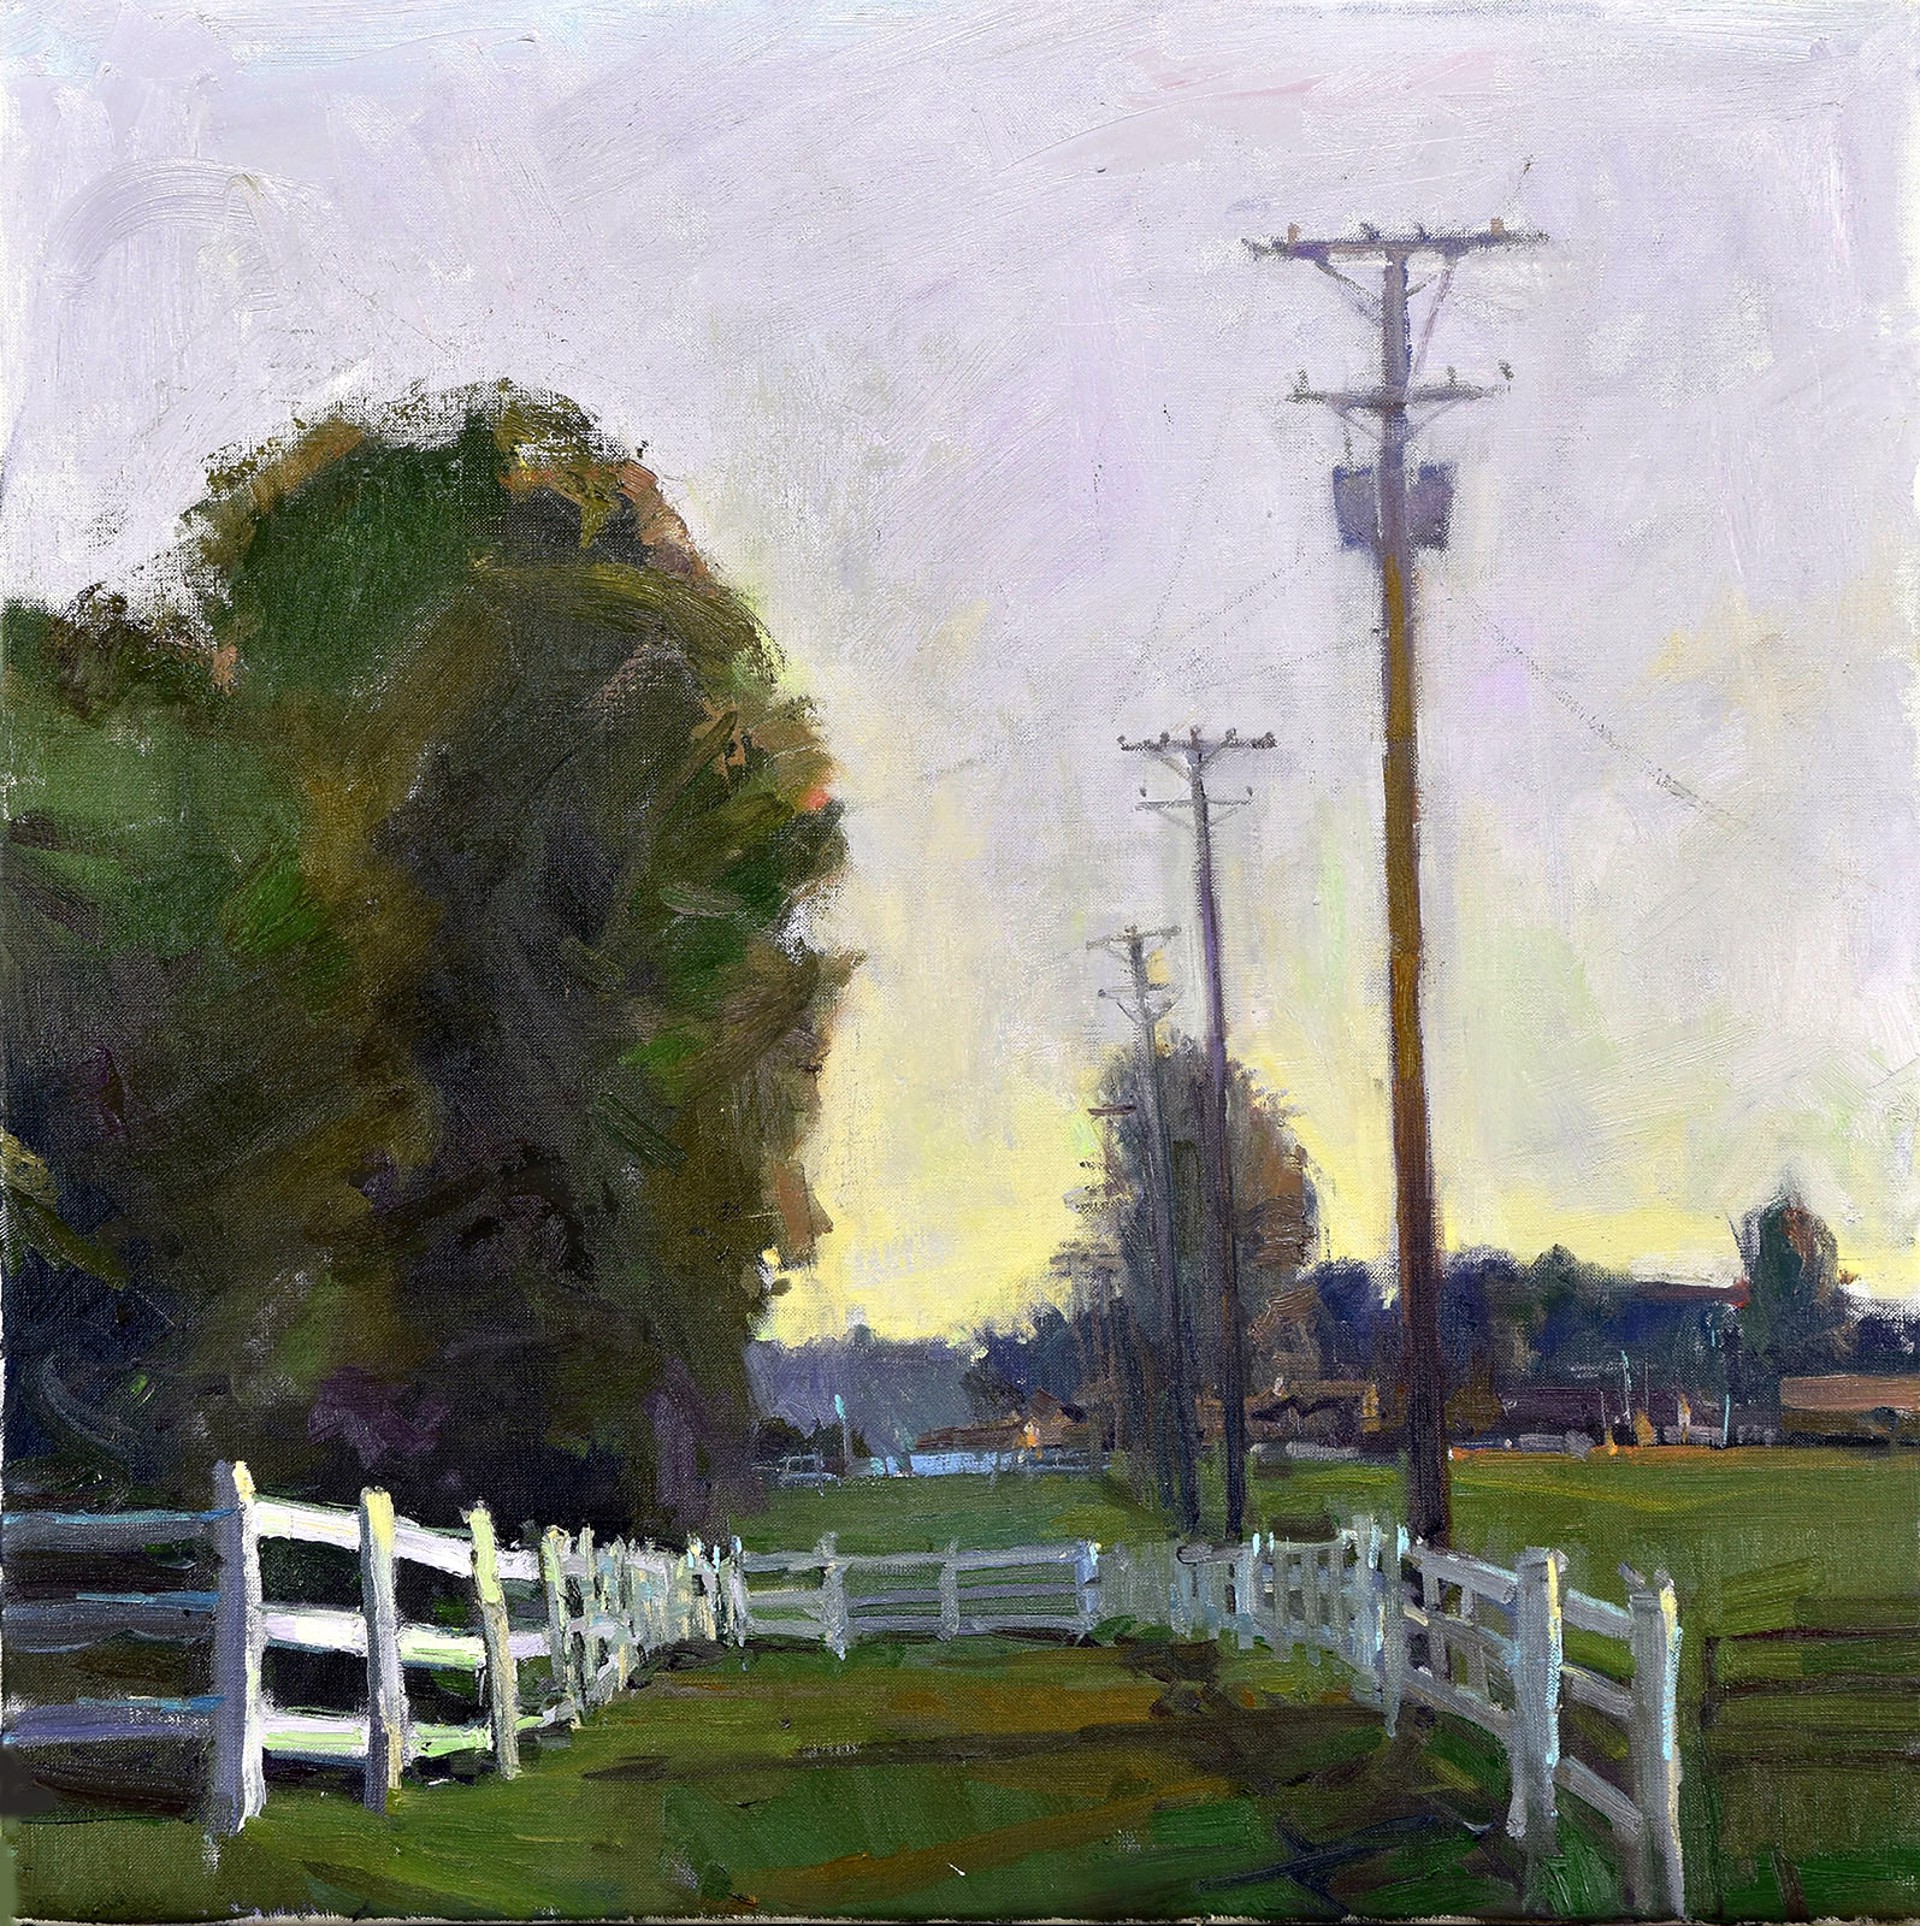 Dawn Whitelaw "Fence Defense" by Oil Painters of America